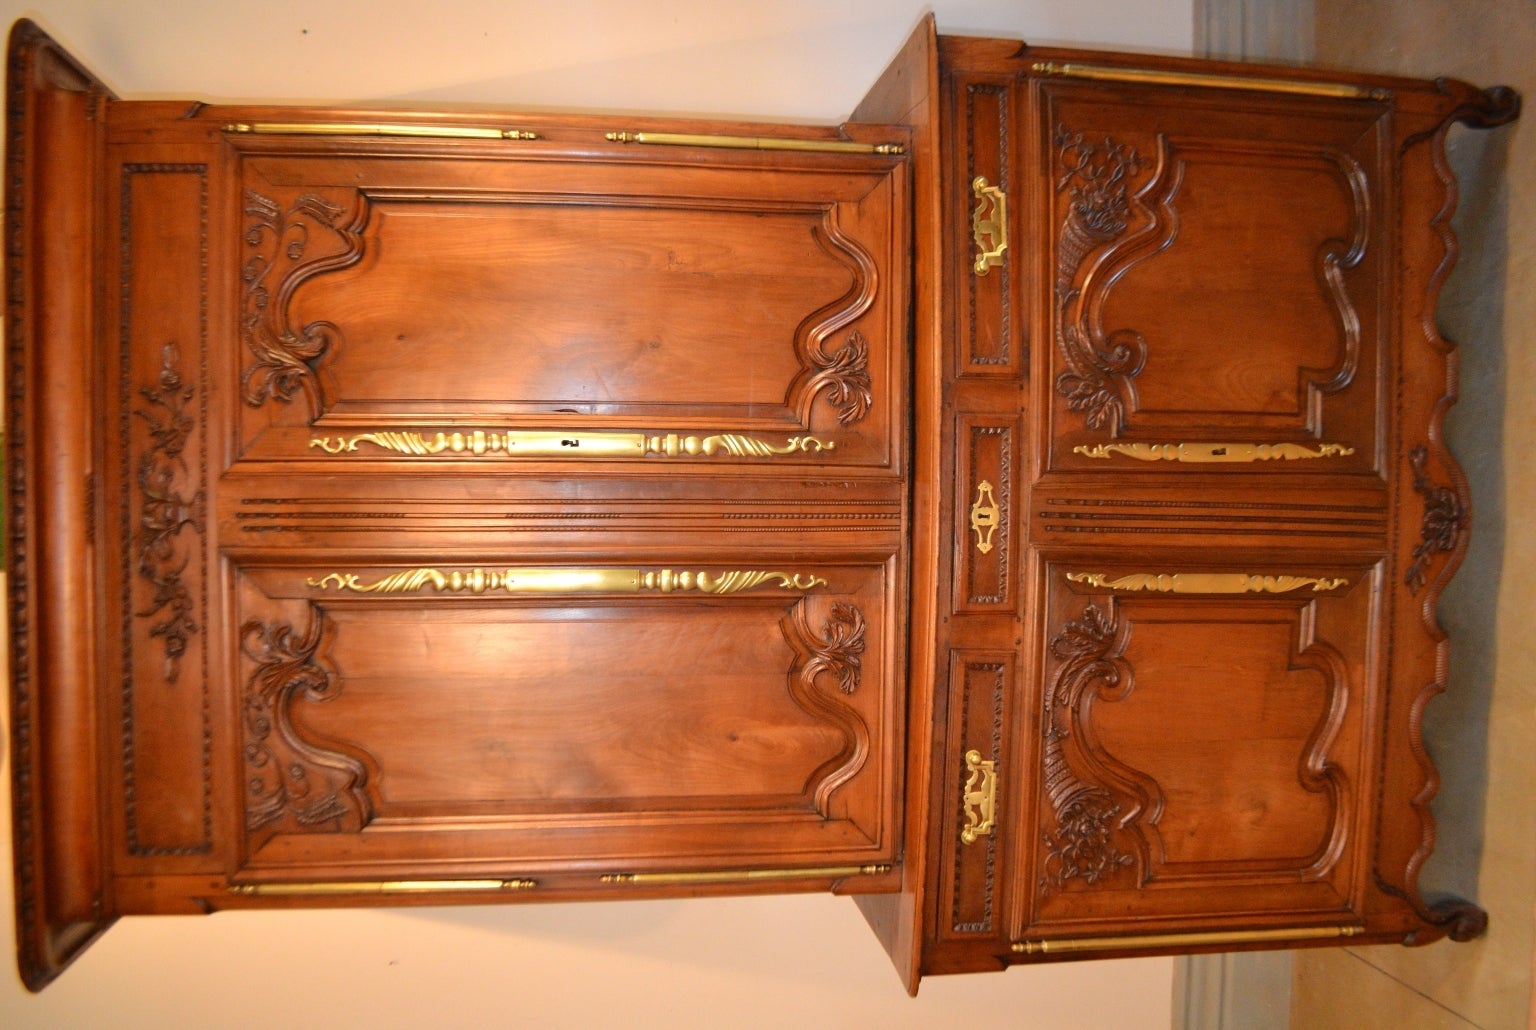 Lovely buffet deux-corps from Normandy with beautiful carved detailing of a floret and grain motif on the cabinet doors, an urn and floret design on the cornice with a bell flower border design, embellished with elongated hinges with turned ends and